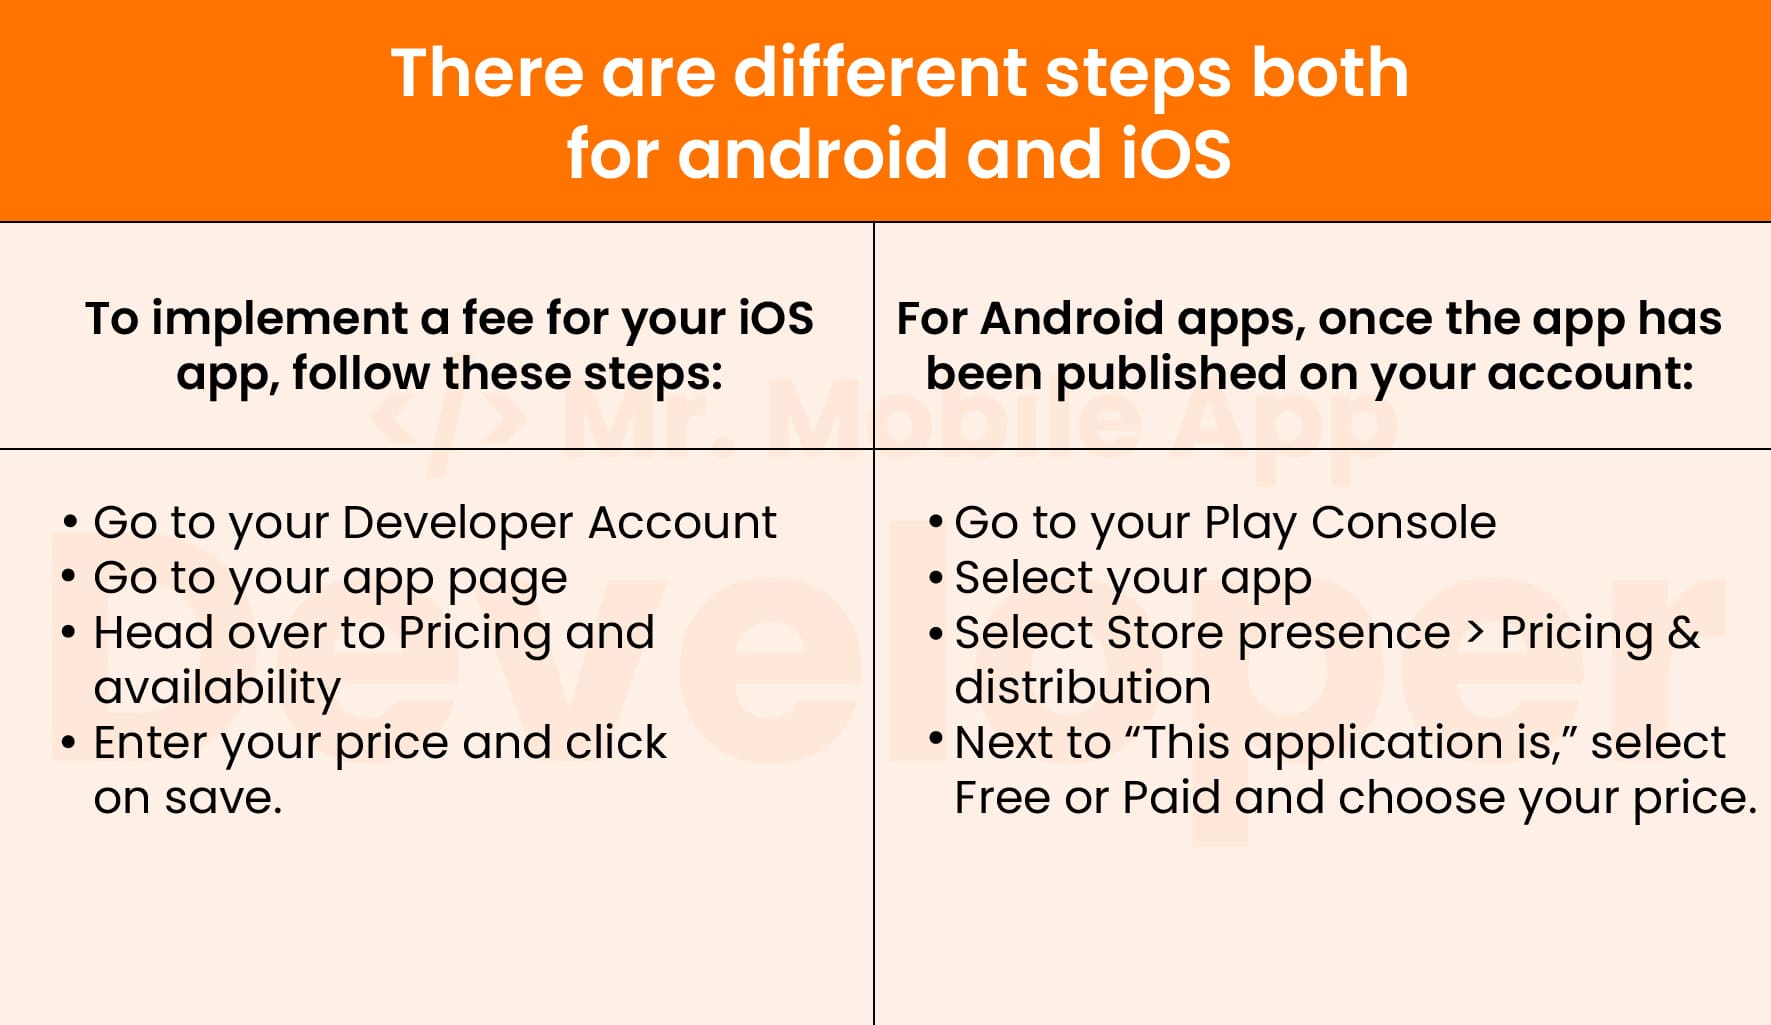 There are different steps both for android and iOS